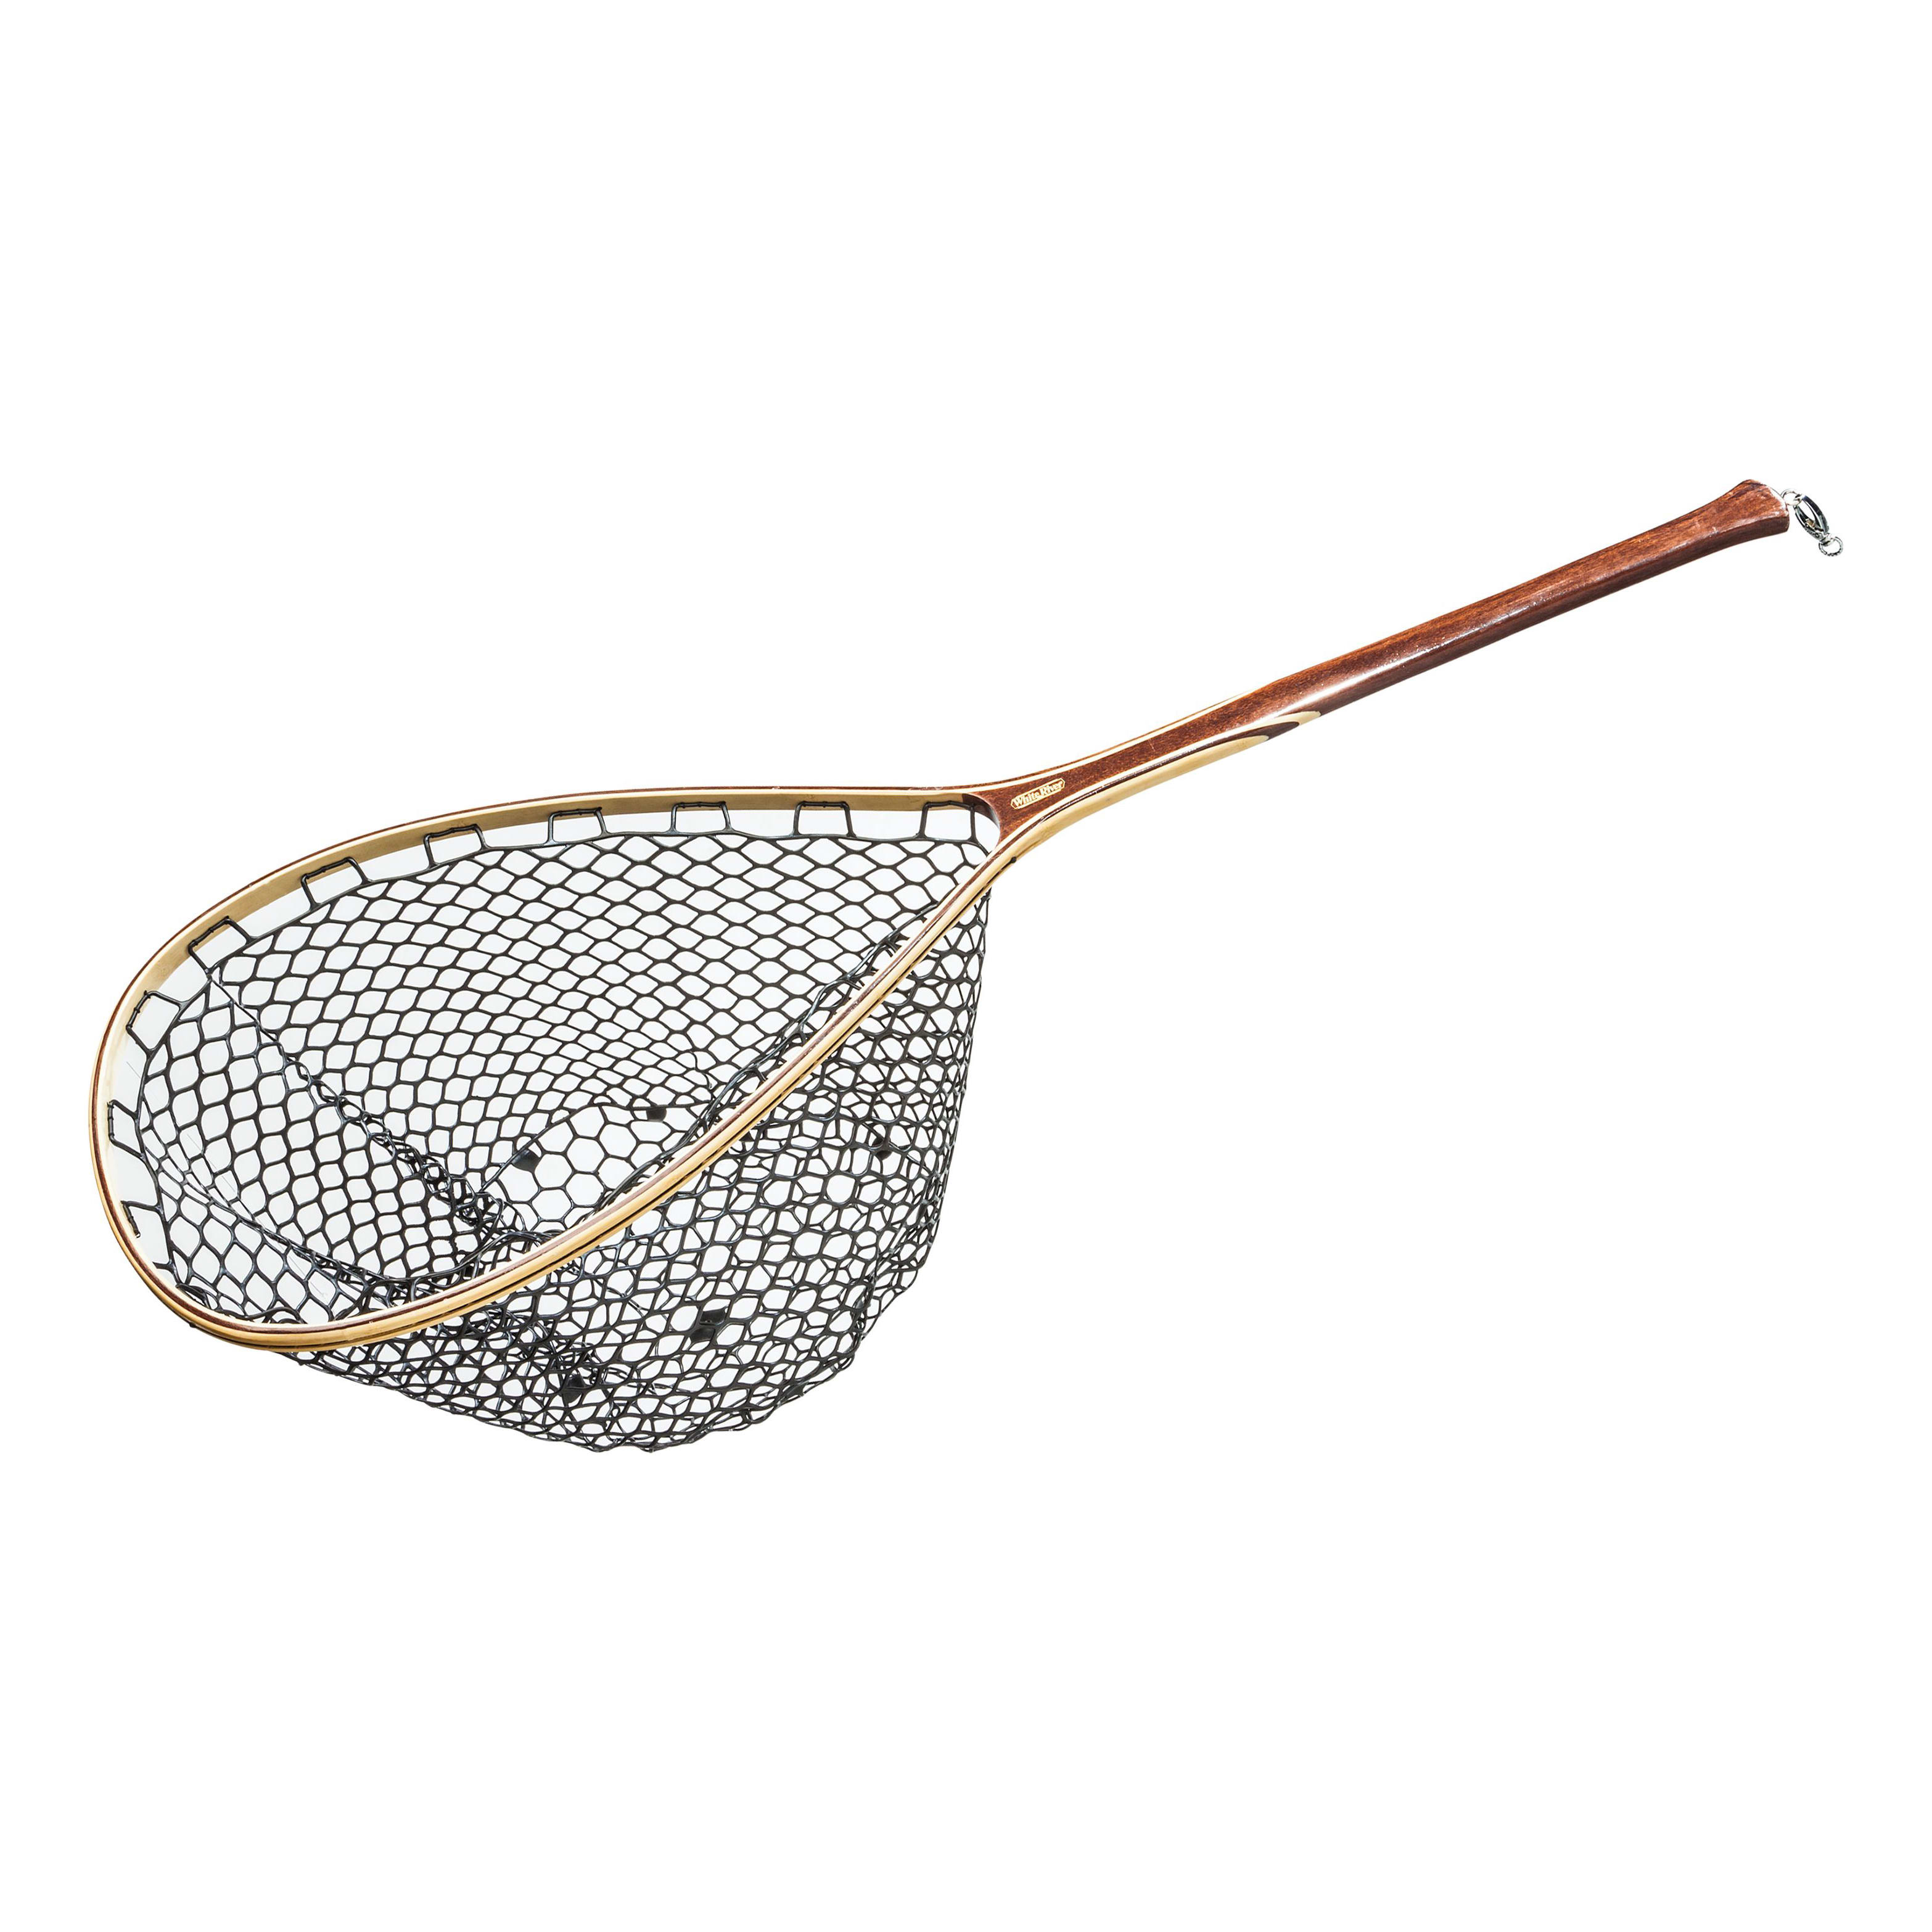 White River Fly Shop Wicker Creel - Cabelas - White RIVER - Nets 